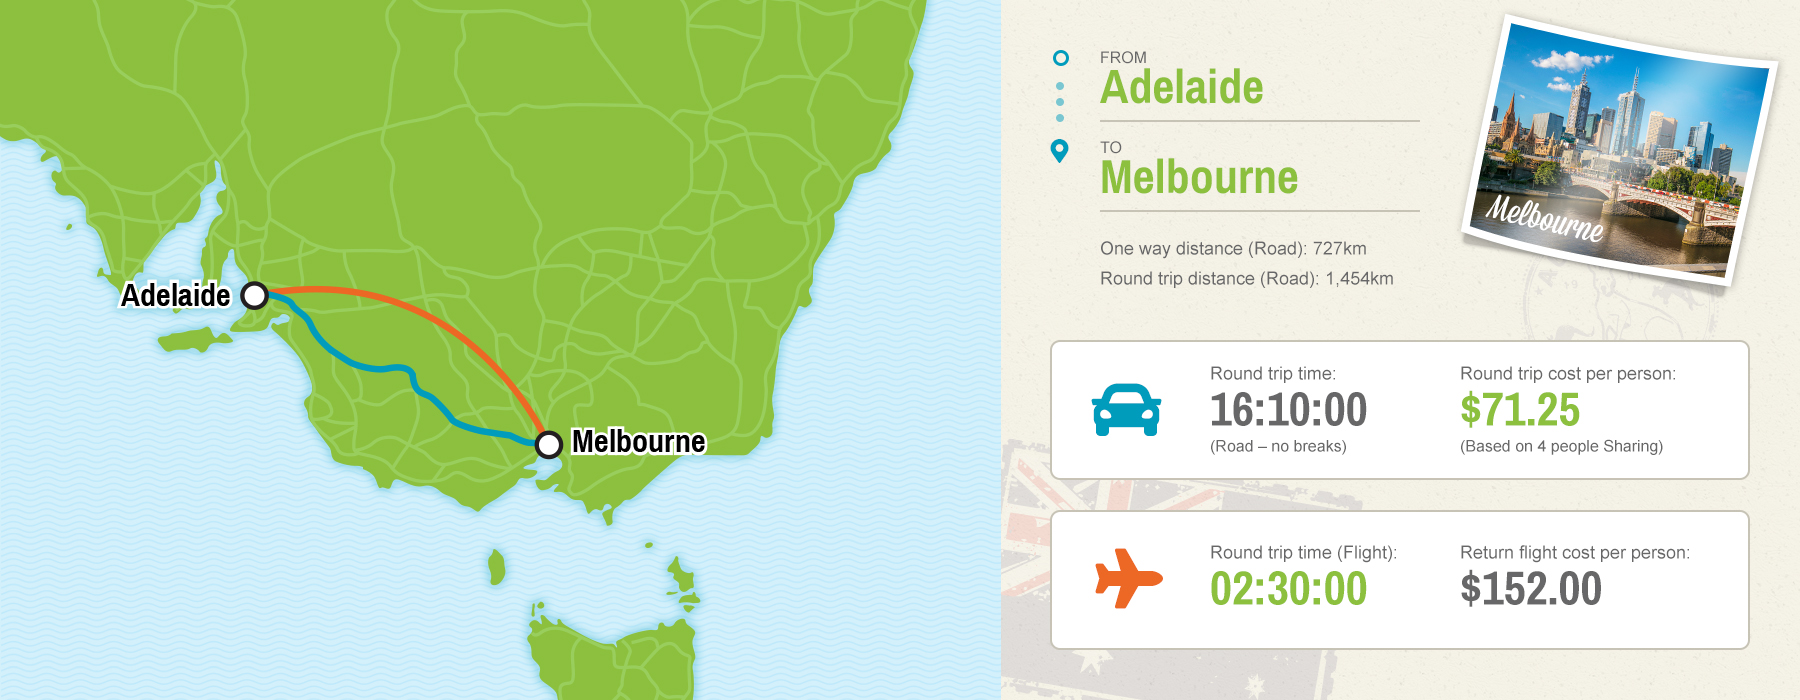 Adelaide to Melbourne map showing driving vs flying